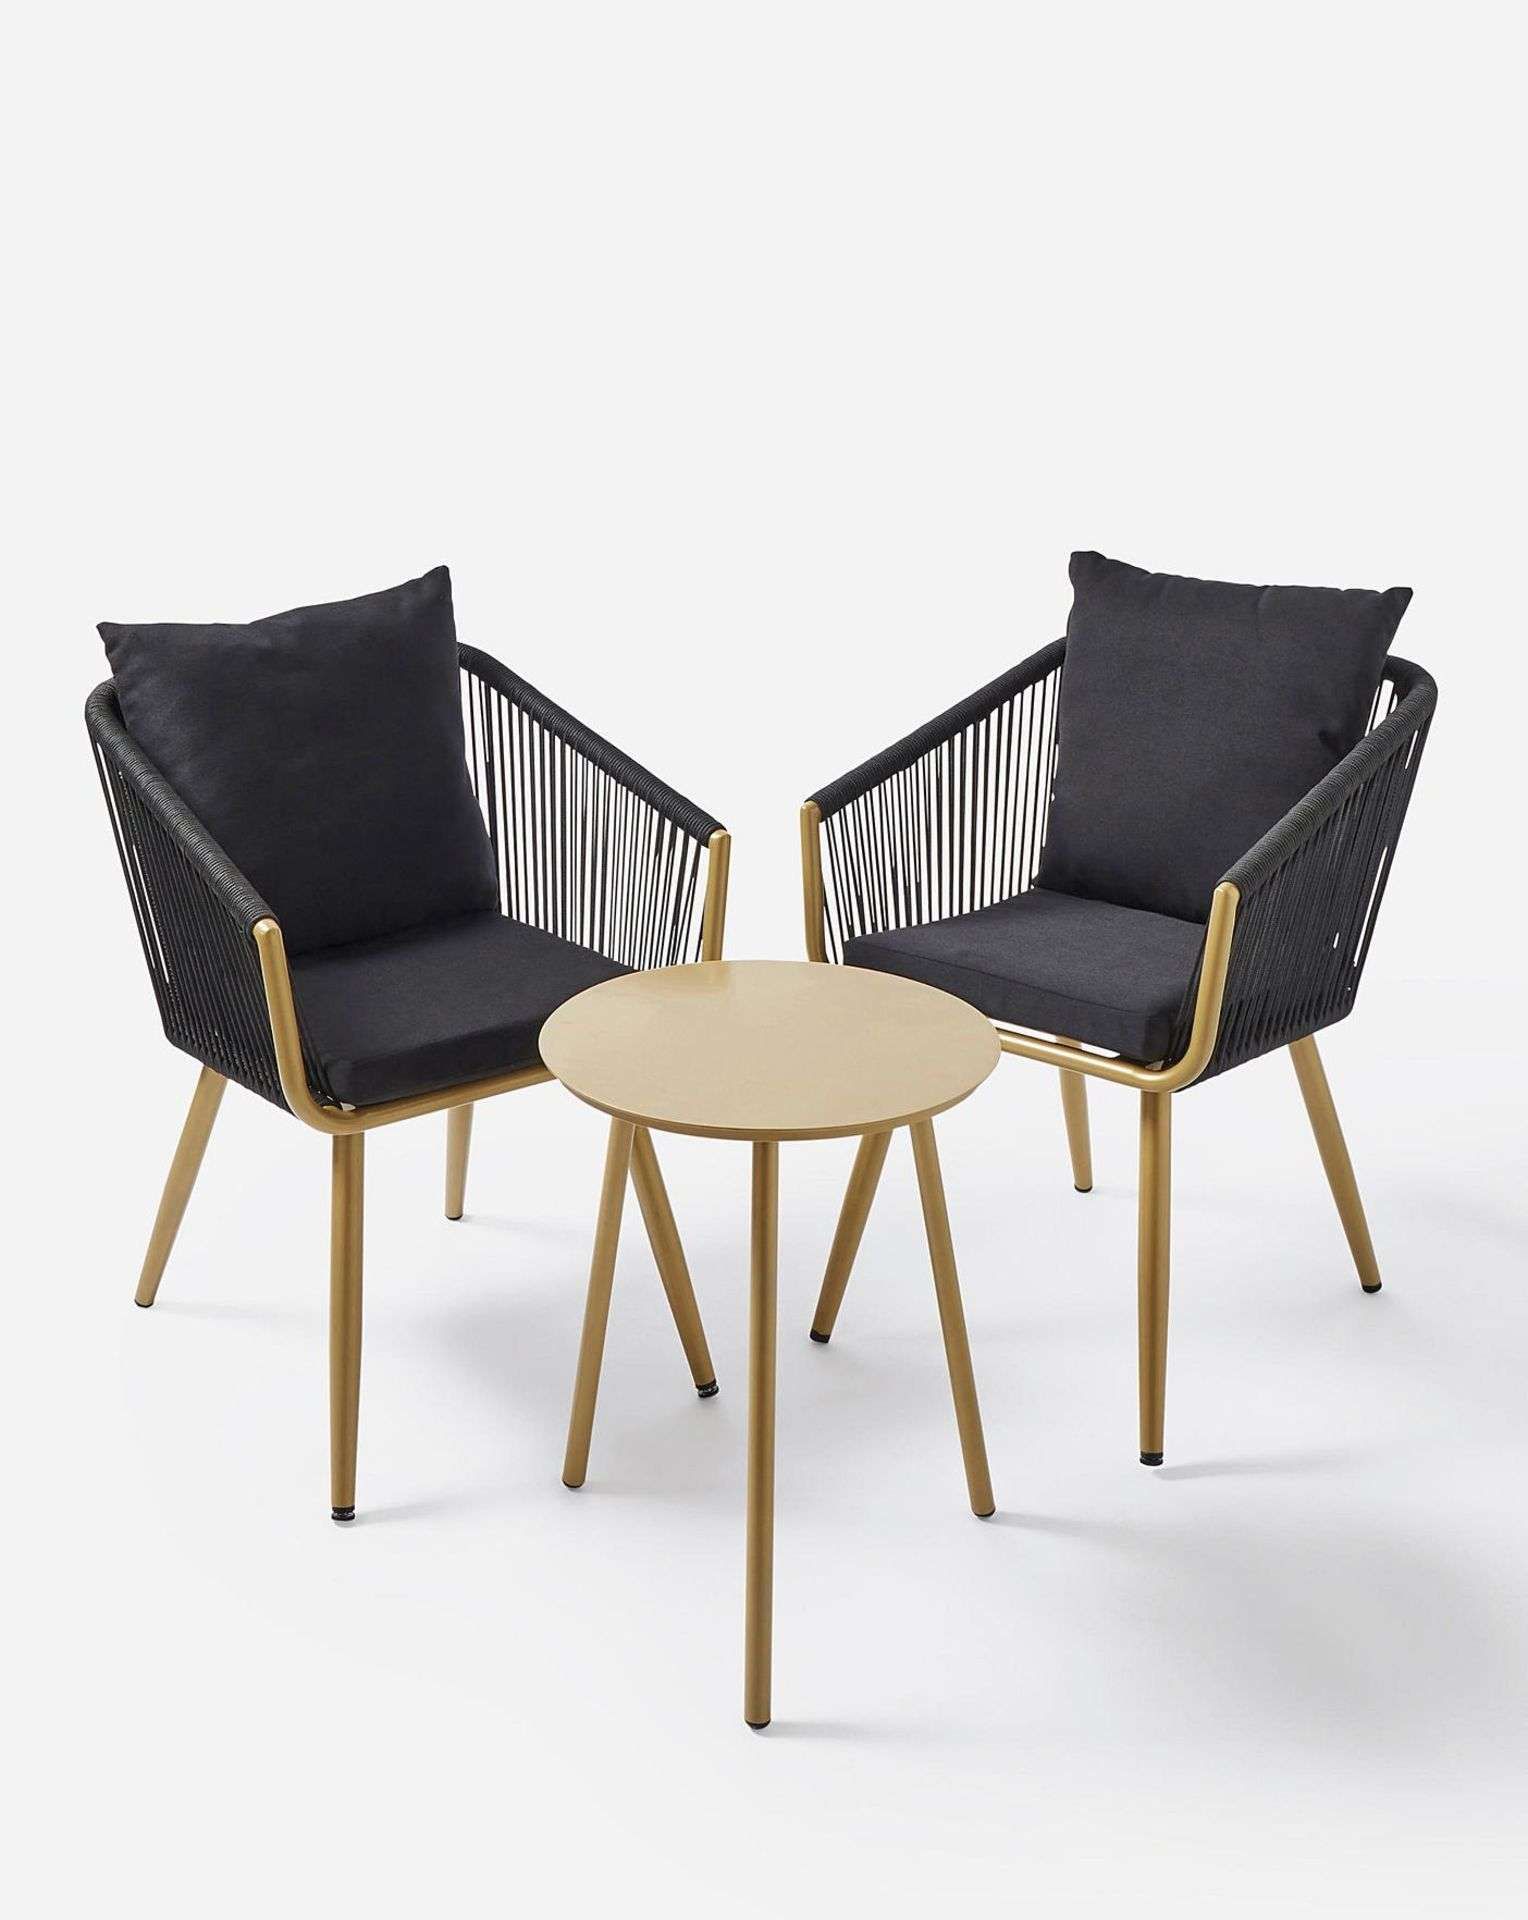 Trade Lot 5 X New & Boxed Joanna Hope Naya Bistro Set. RRP £379 each. (E/R) This Exclusive Joanna - Image 2 of 2